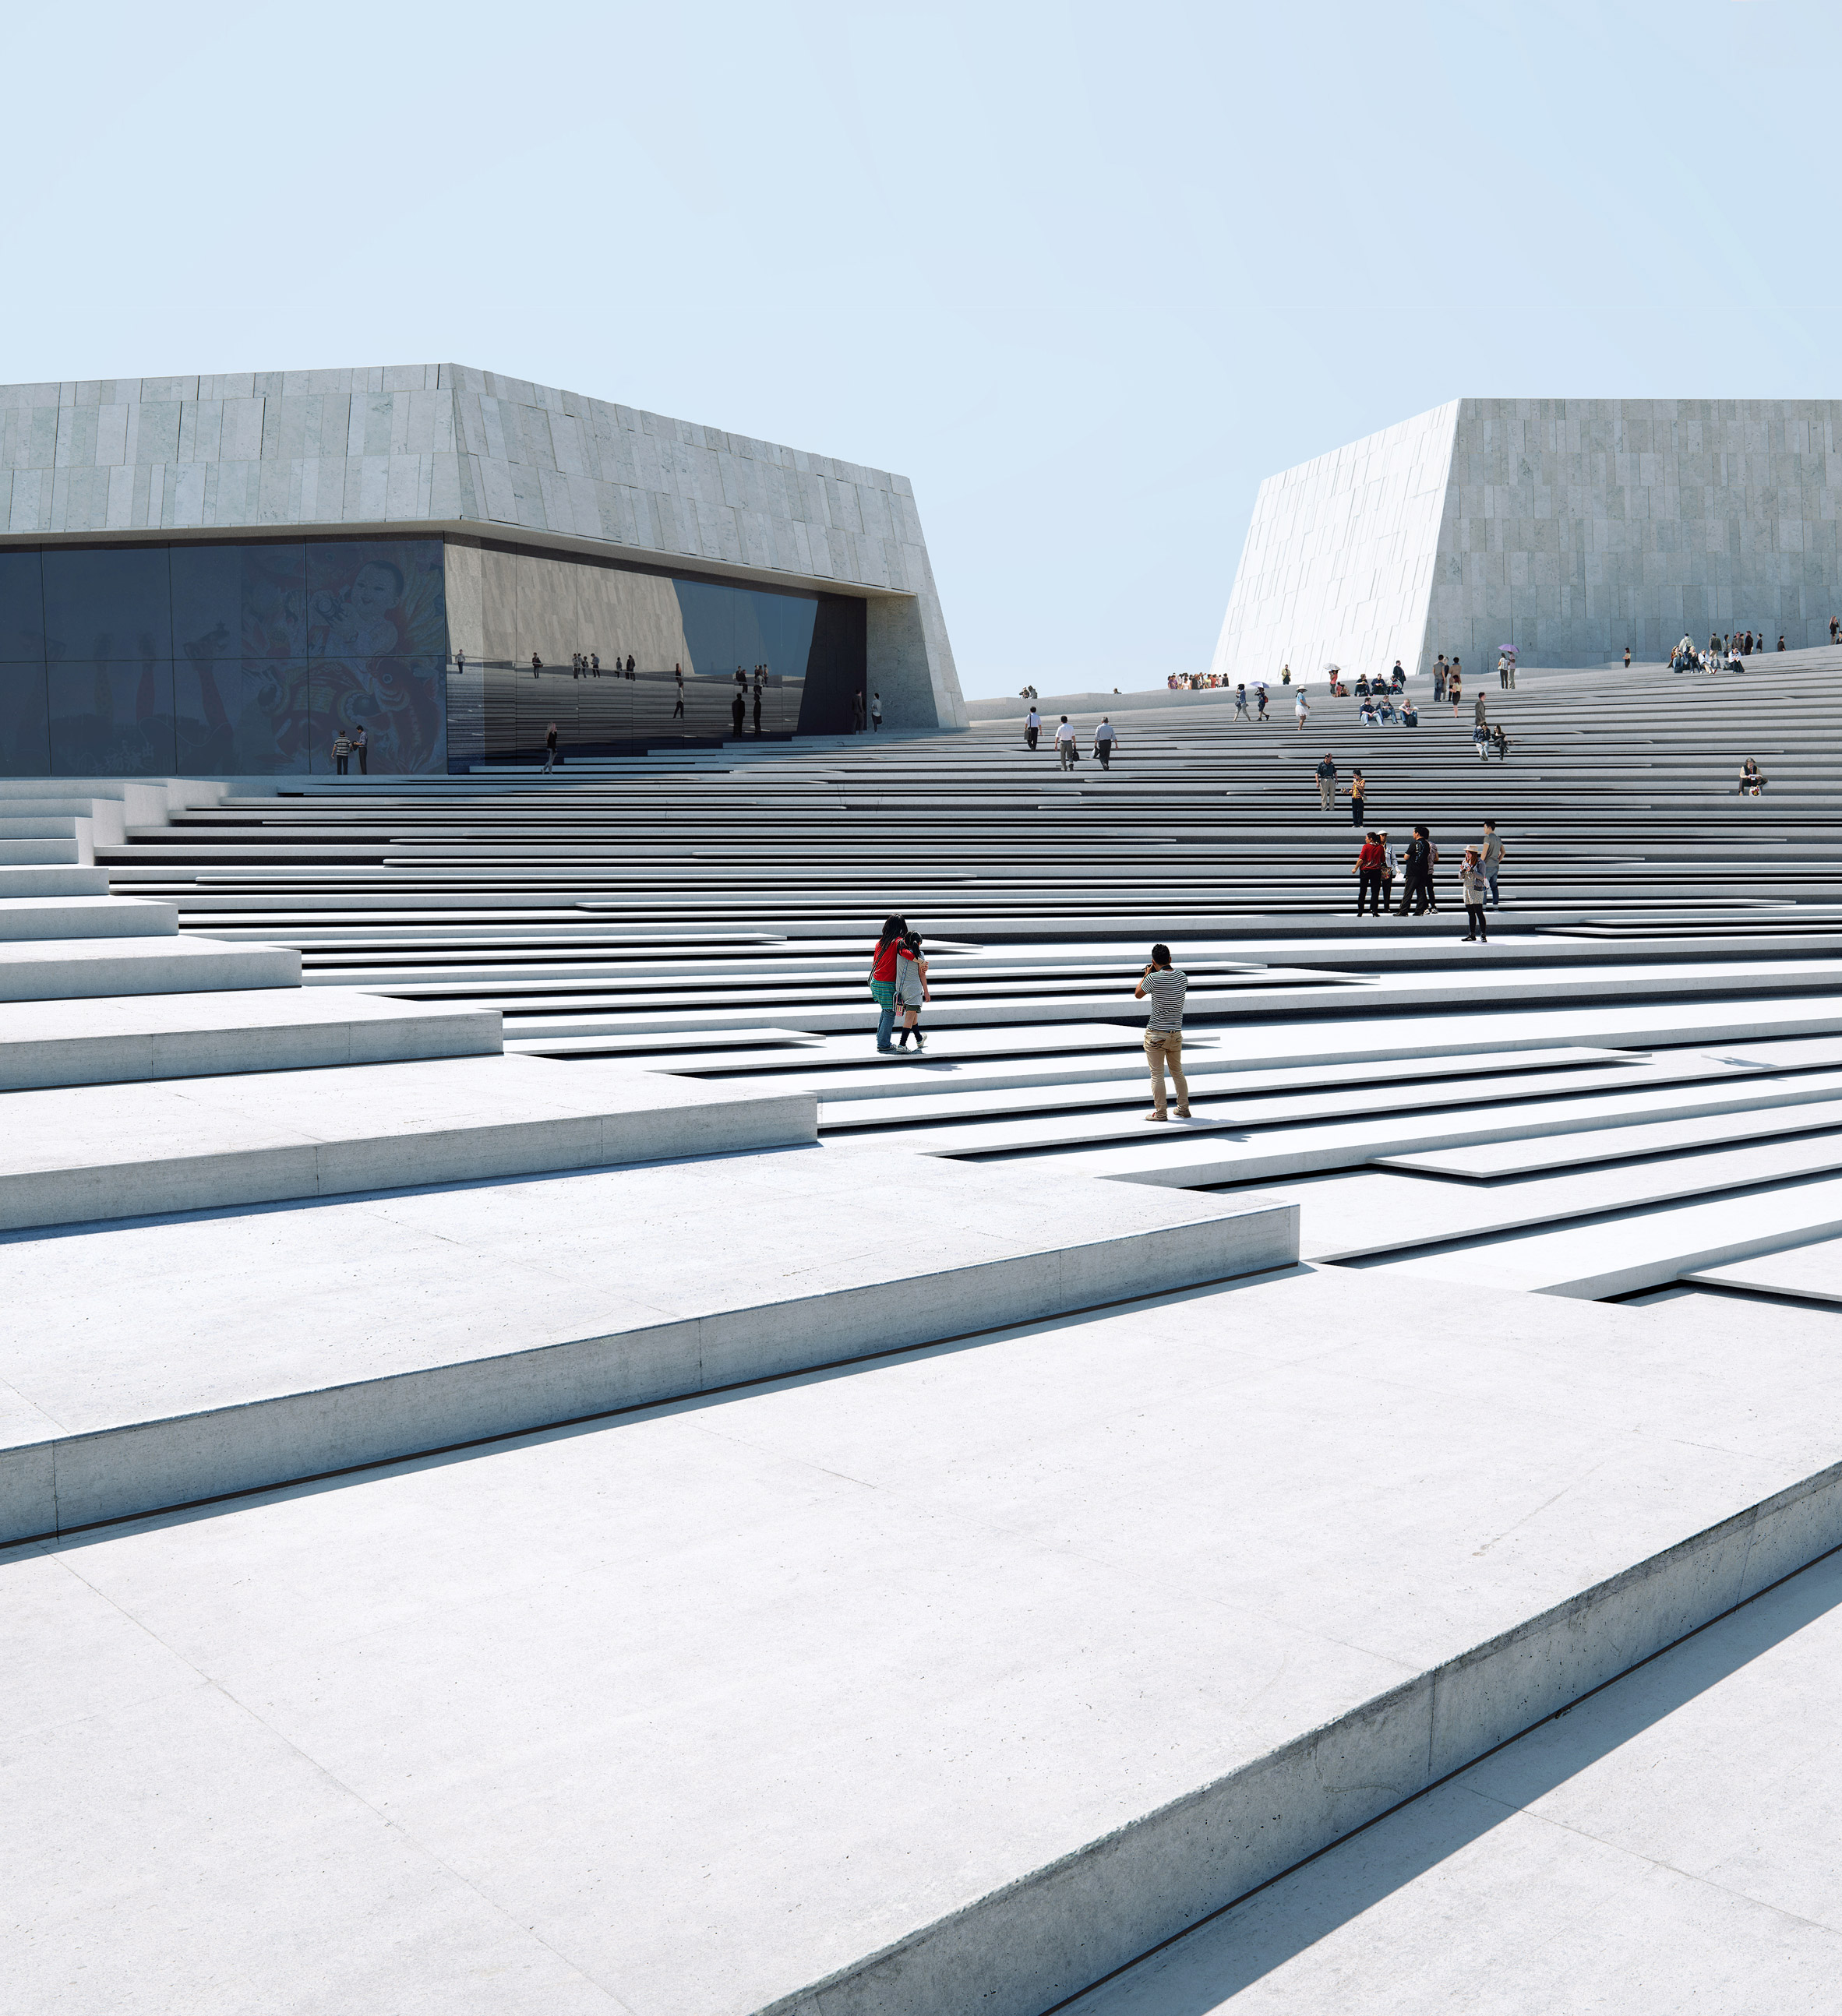 Renders of Shanghai Grand Opera House by Snøhetta in China